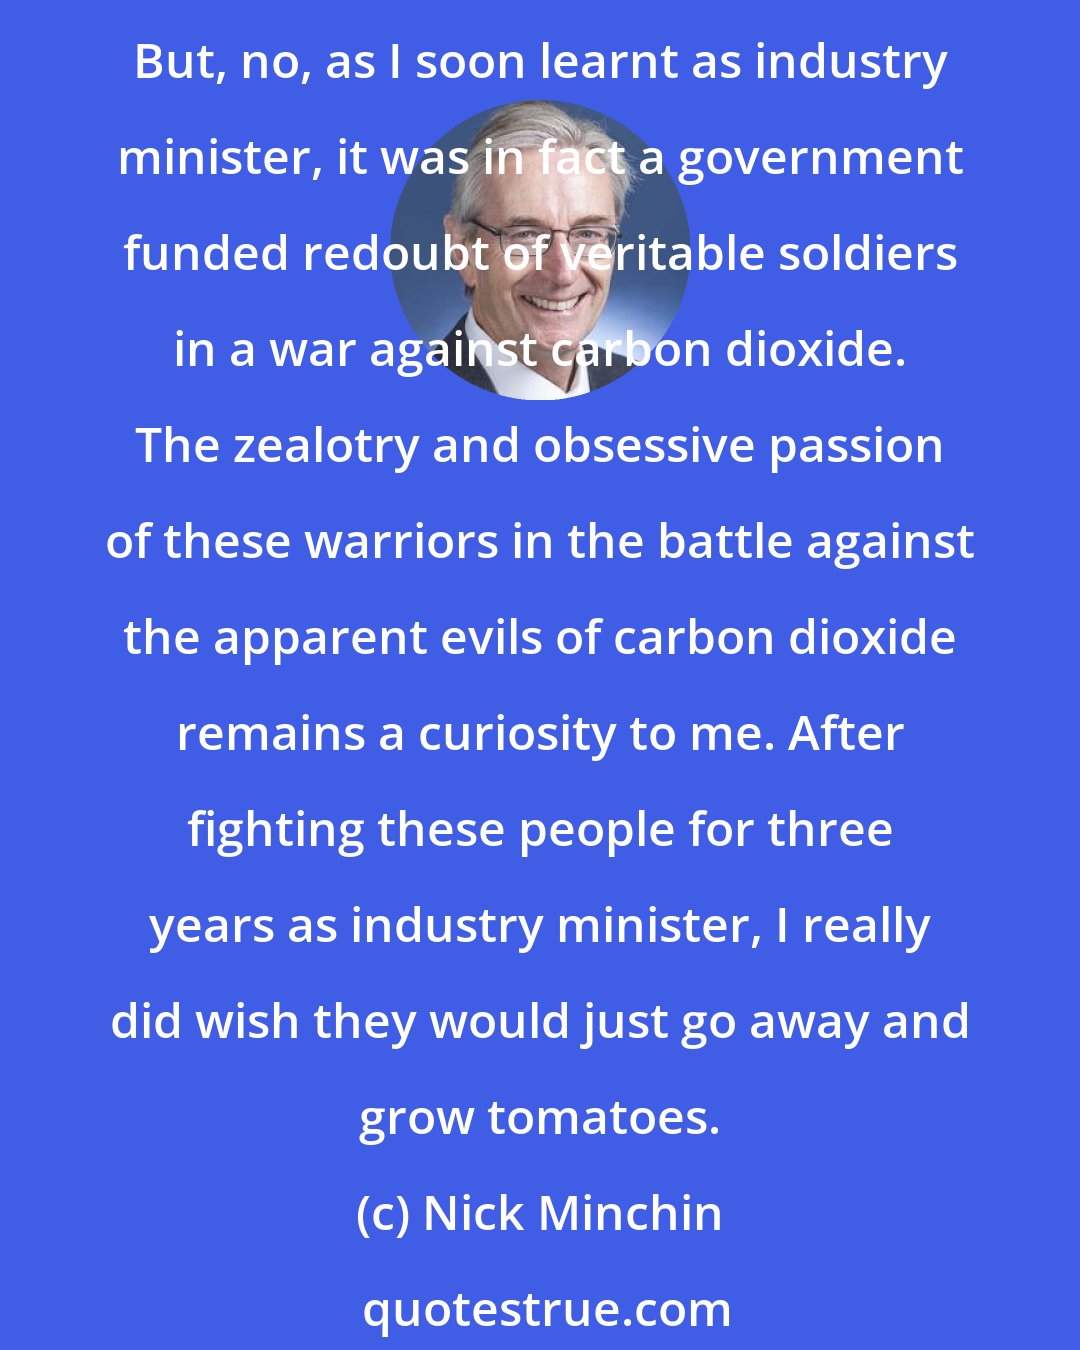 Nick Minchin: I must say that when I first learned of the existence of the Australian Greenhouse Office, I assumed it was responsible for supplying tomatoes to the Parliament House kitchen. But, no, as I soon learnt as industry minister, it was in fact a government funded redoubt of veritable soldiers in a war against carbon dioxide. The zealotry and obsessive passion of these warriors in the battle against the apparent evils of carbon dioxide remains a curiosity to me. After fighting these people for three years as industry minister, I really did wish they would just go away and grow tomatoes.